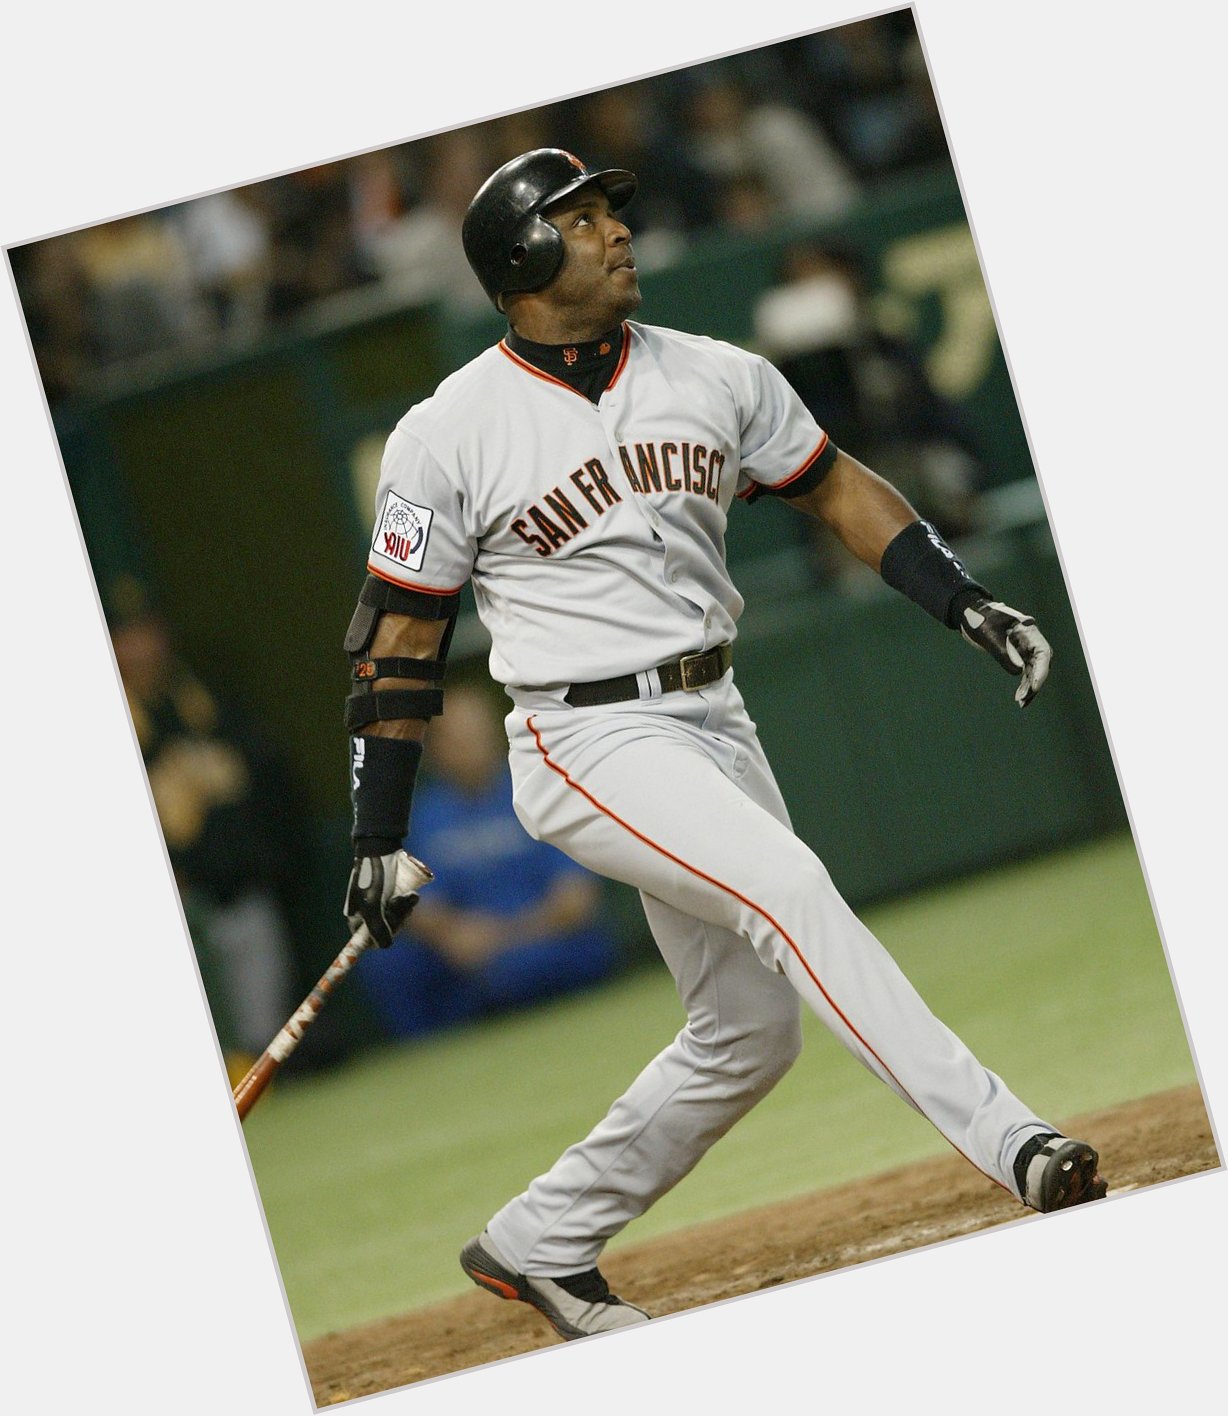 Happy birthday, Barry Bonds!

PUT BARRY BONDS IN THE HALL OF FAME! 